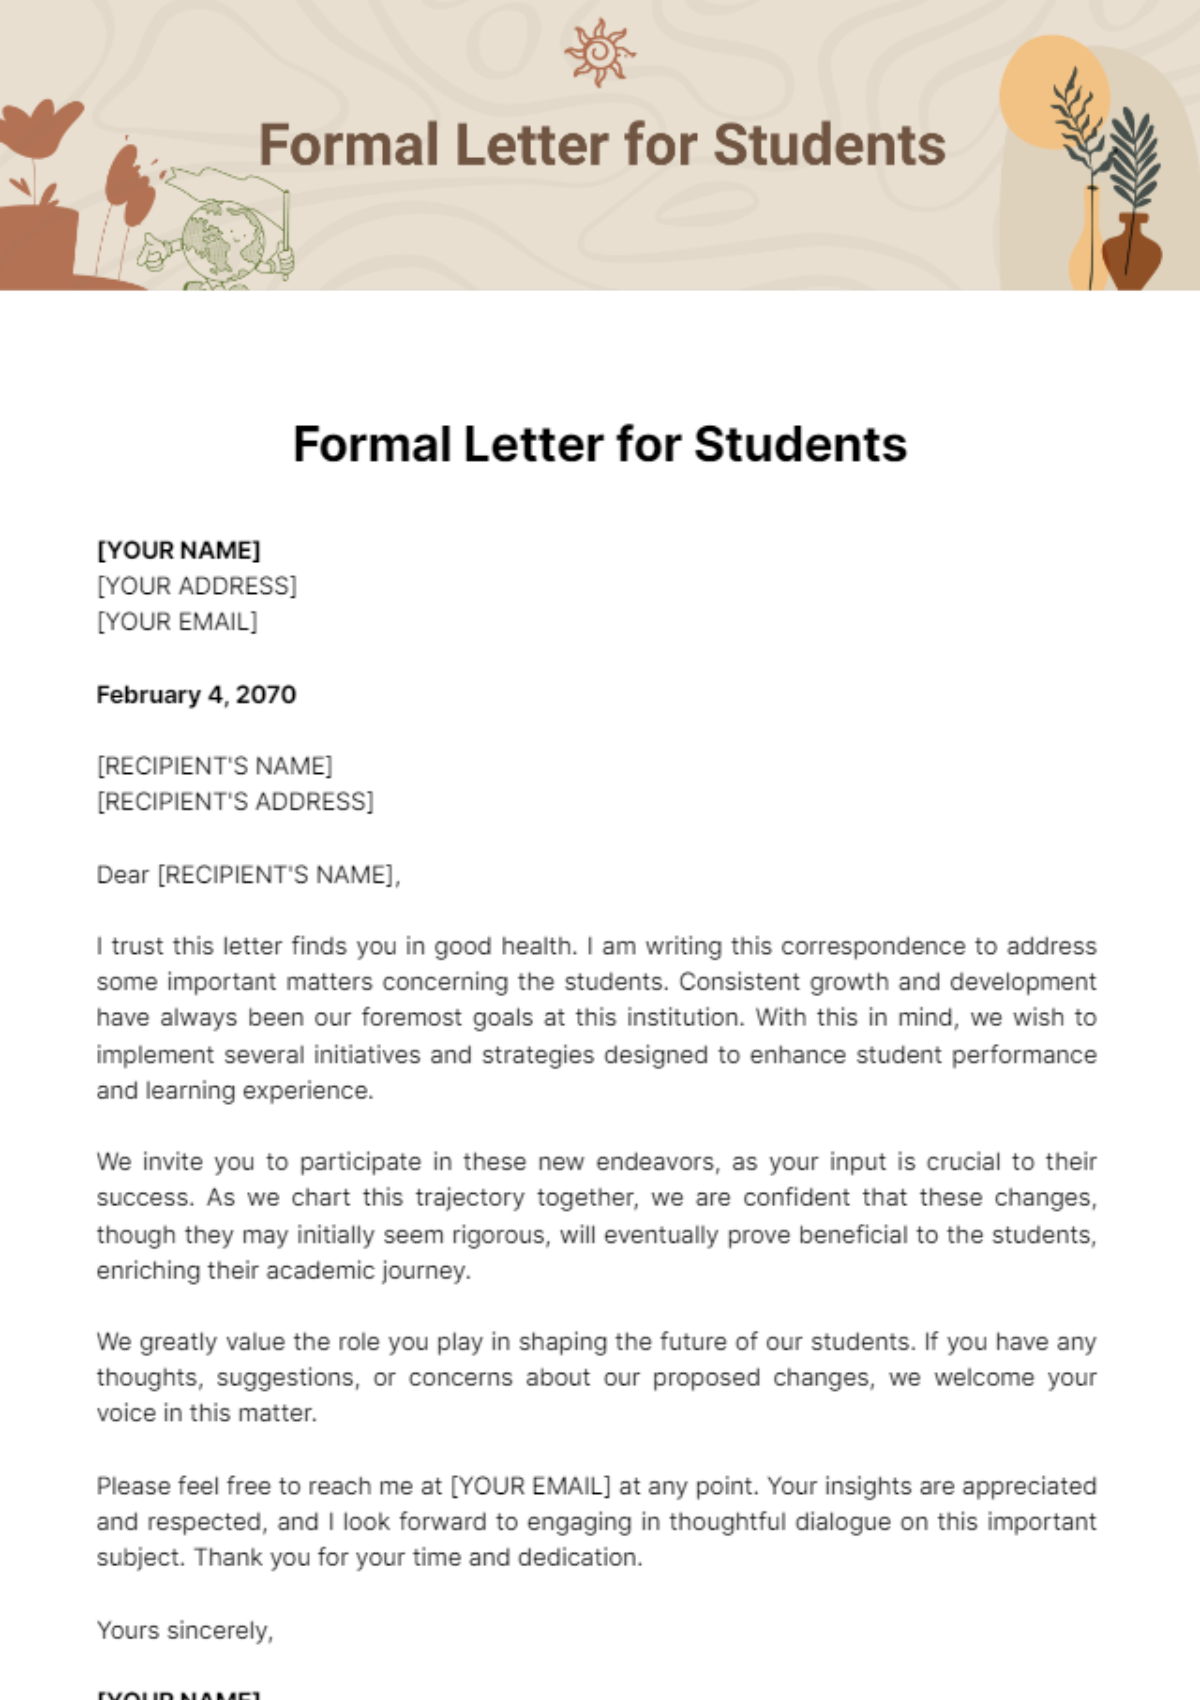 Free Formal Letter for Students Template